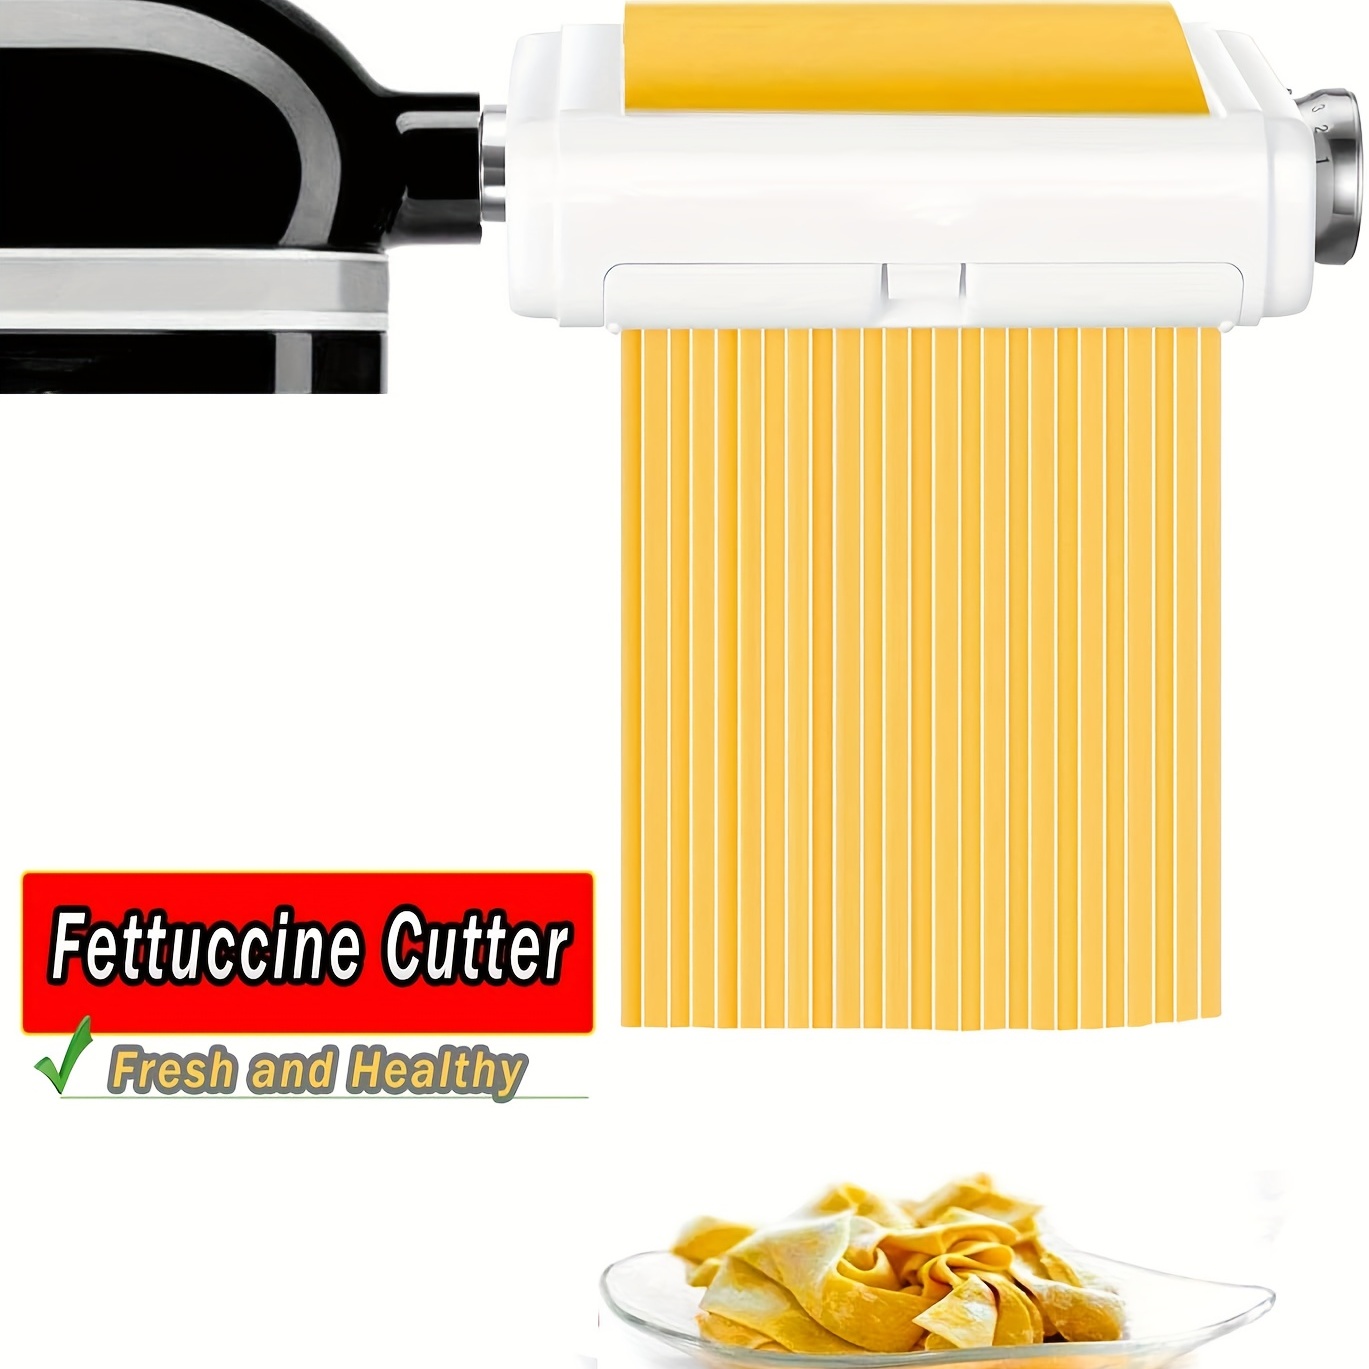 Antree Pasta Maker Attachment 3 in 1 Set for KitchenAid Stand Mixers  Included Pasta Sheet Roller, Spaghetti Cutter, Fettuccine Cutter Maker